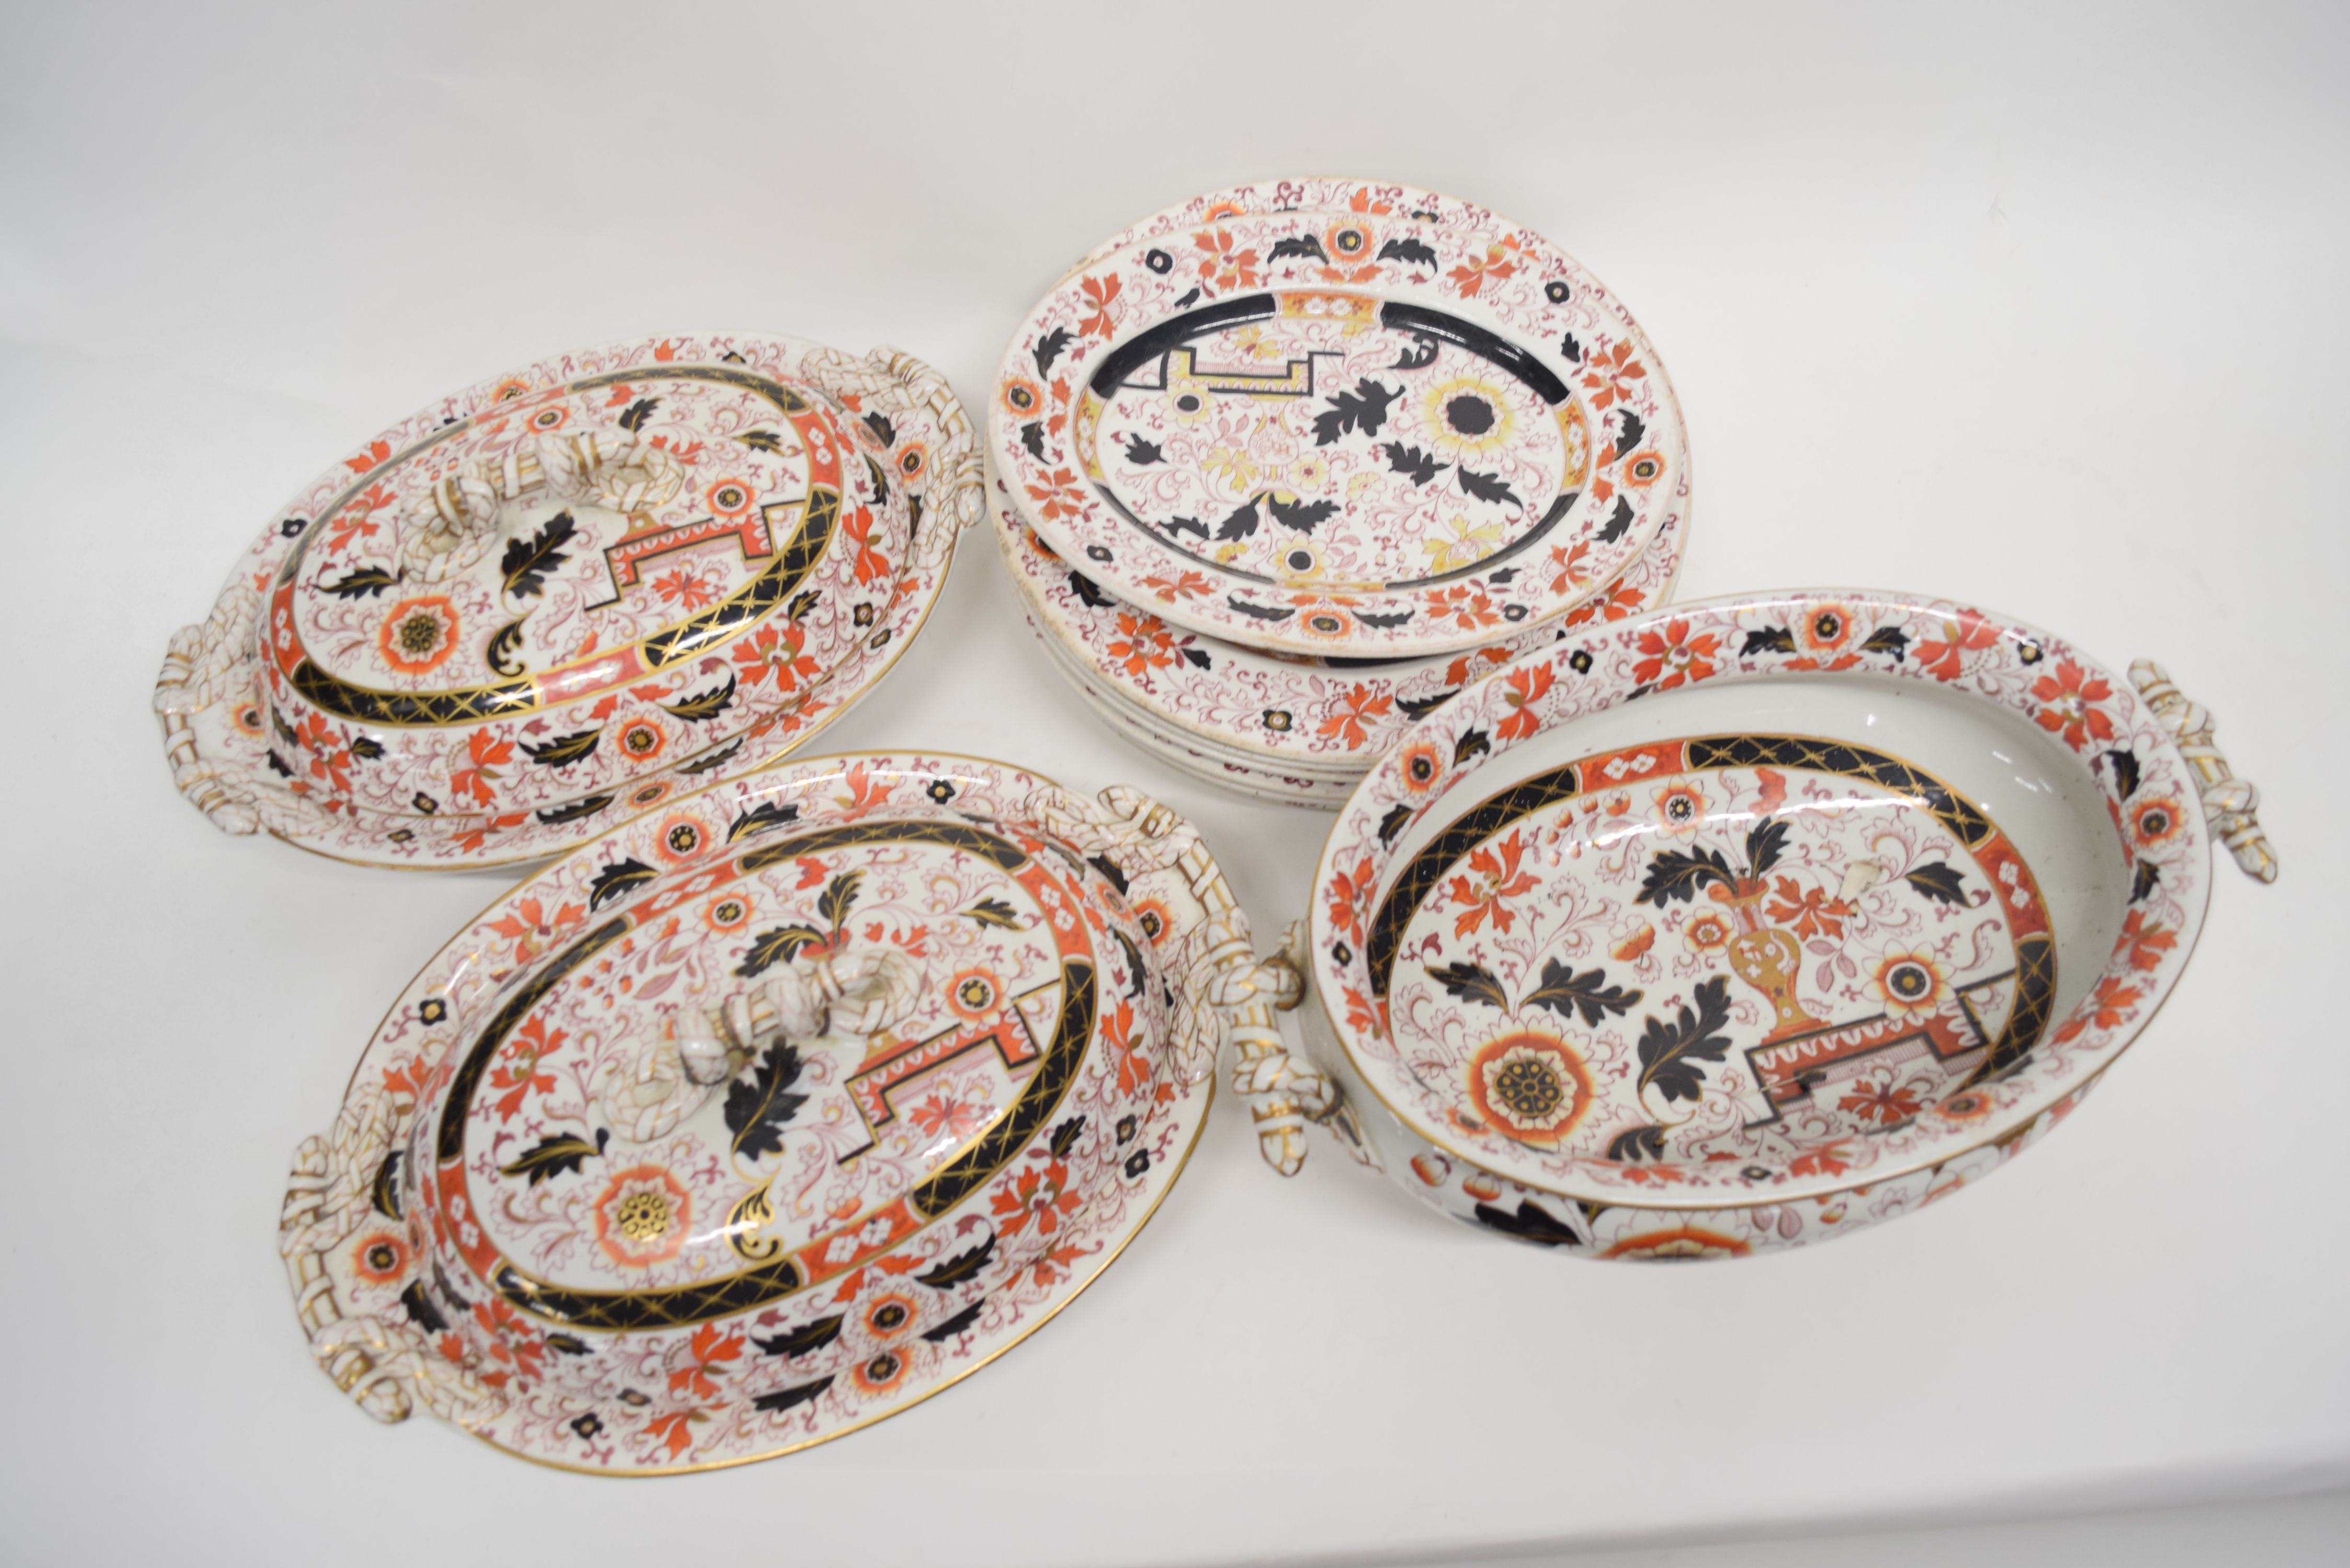 Group of Ashworths Ironstone dinner wares in an Imari pattern including two tureens and covers,